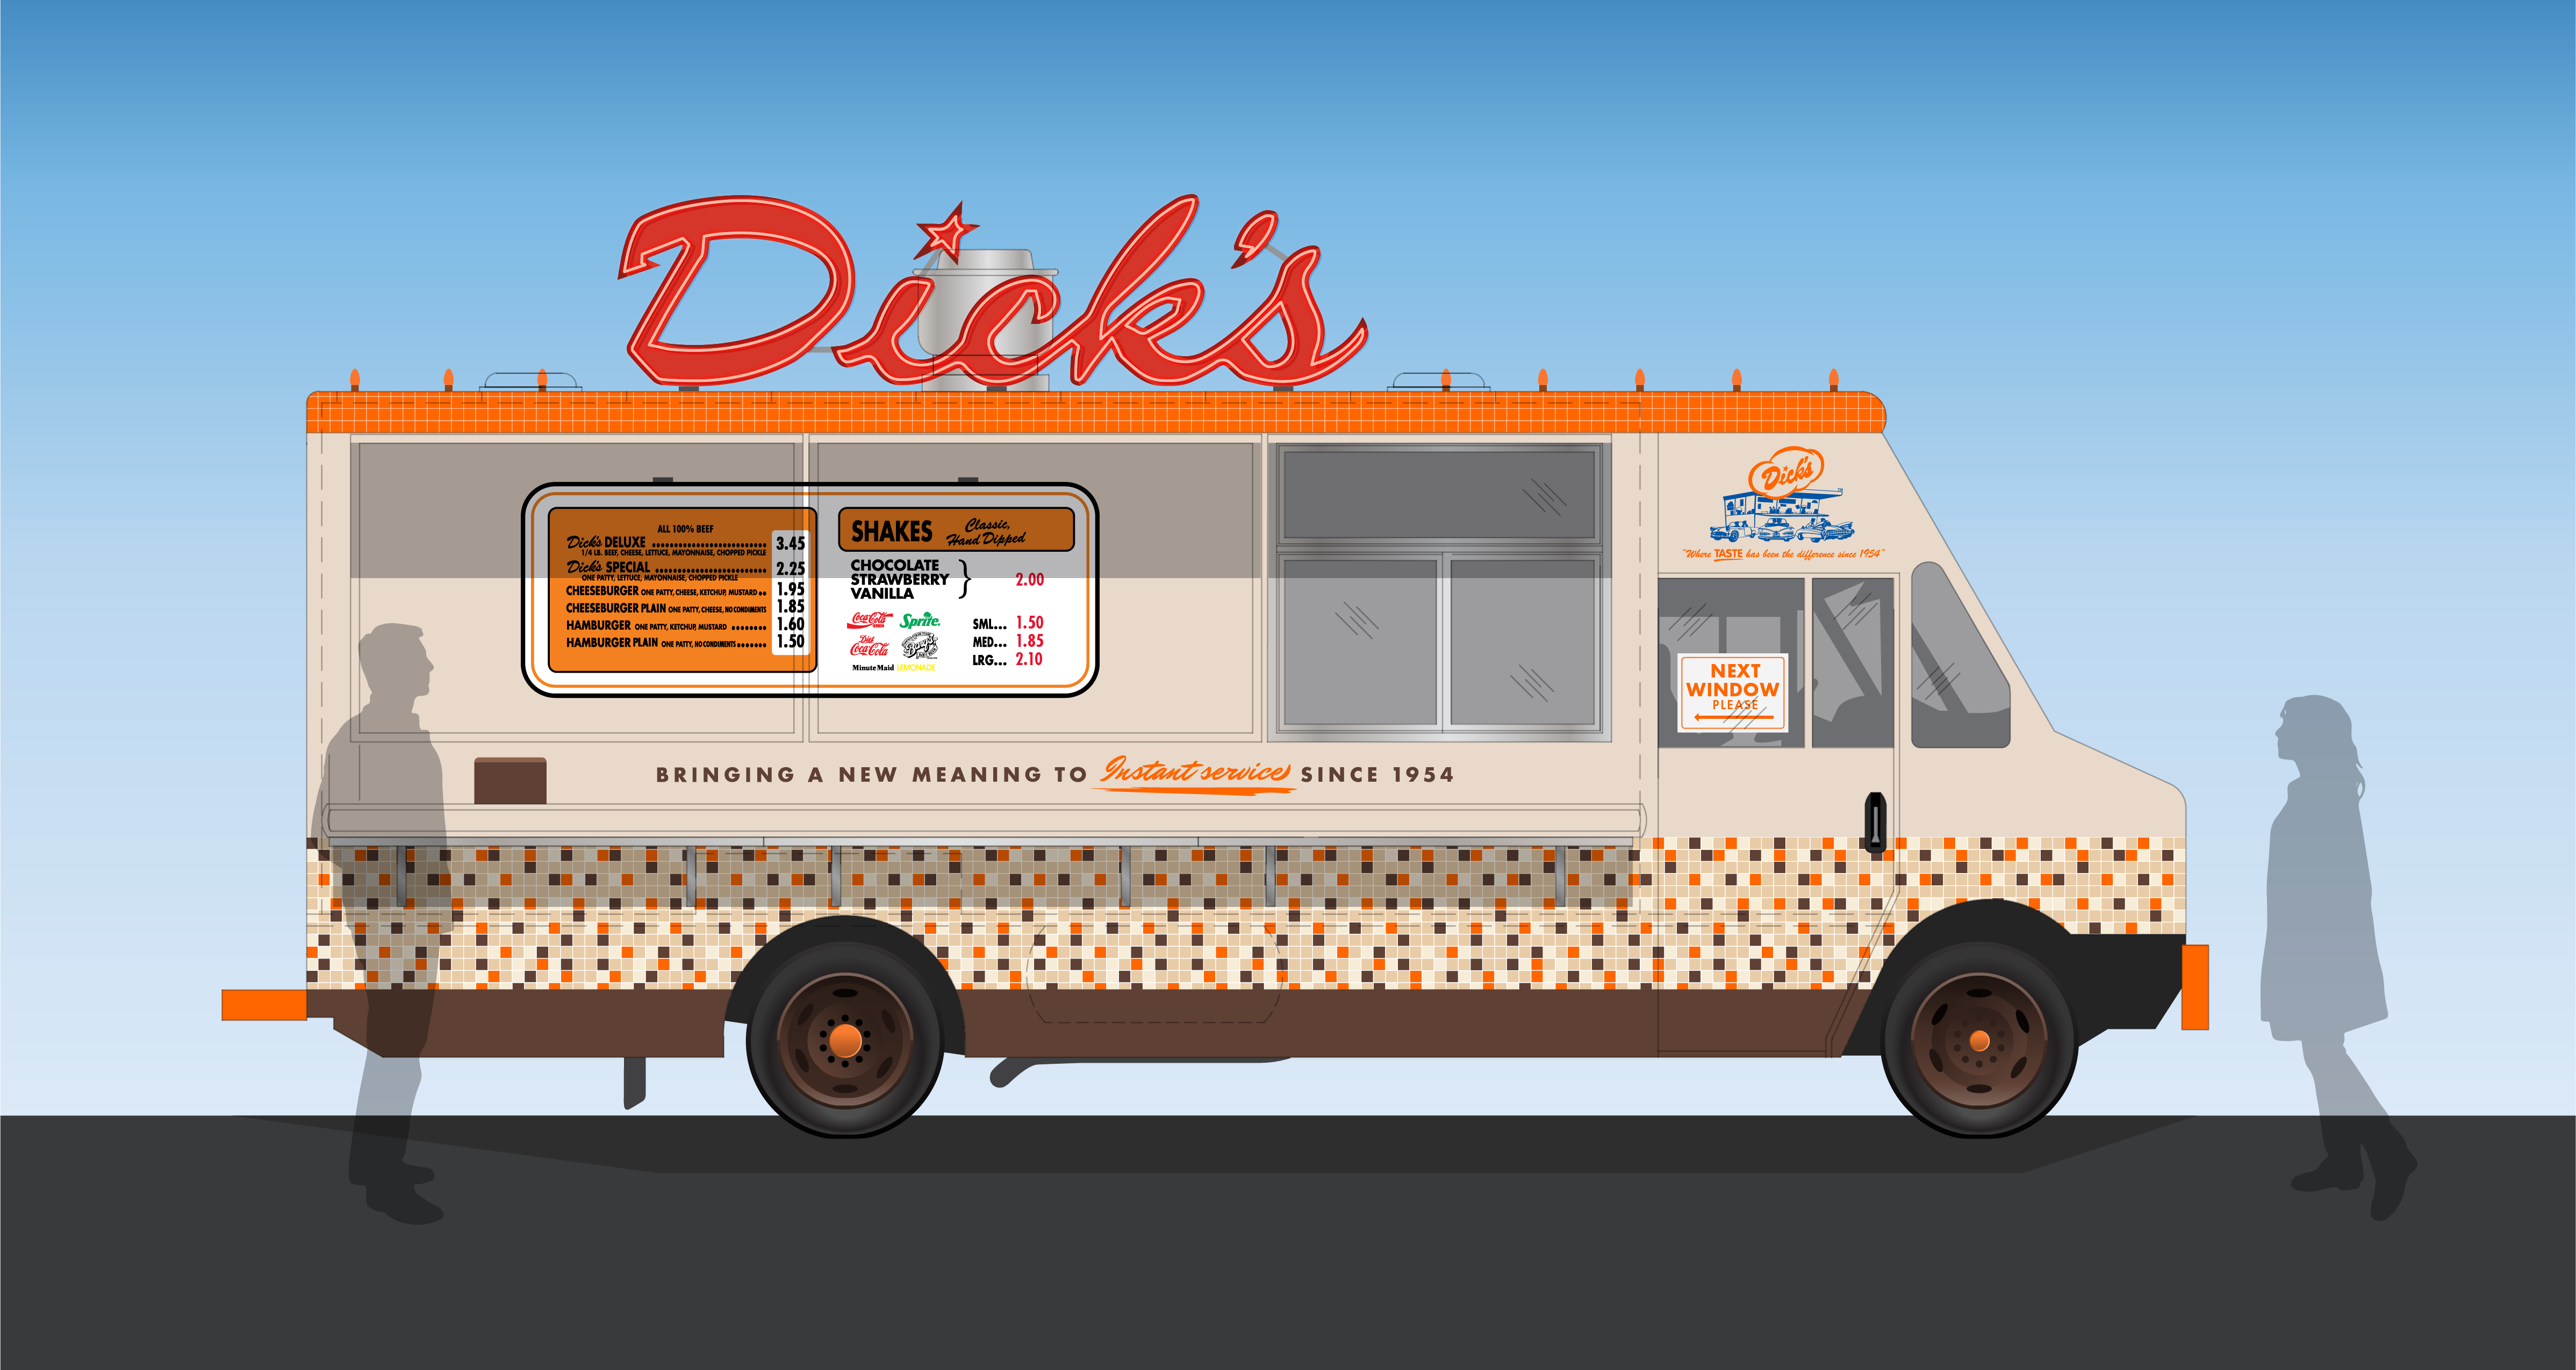 A computer rendering showing a food truck with the “Dick’s Drive-In” logo on the side in orange script lettering 